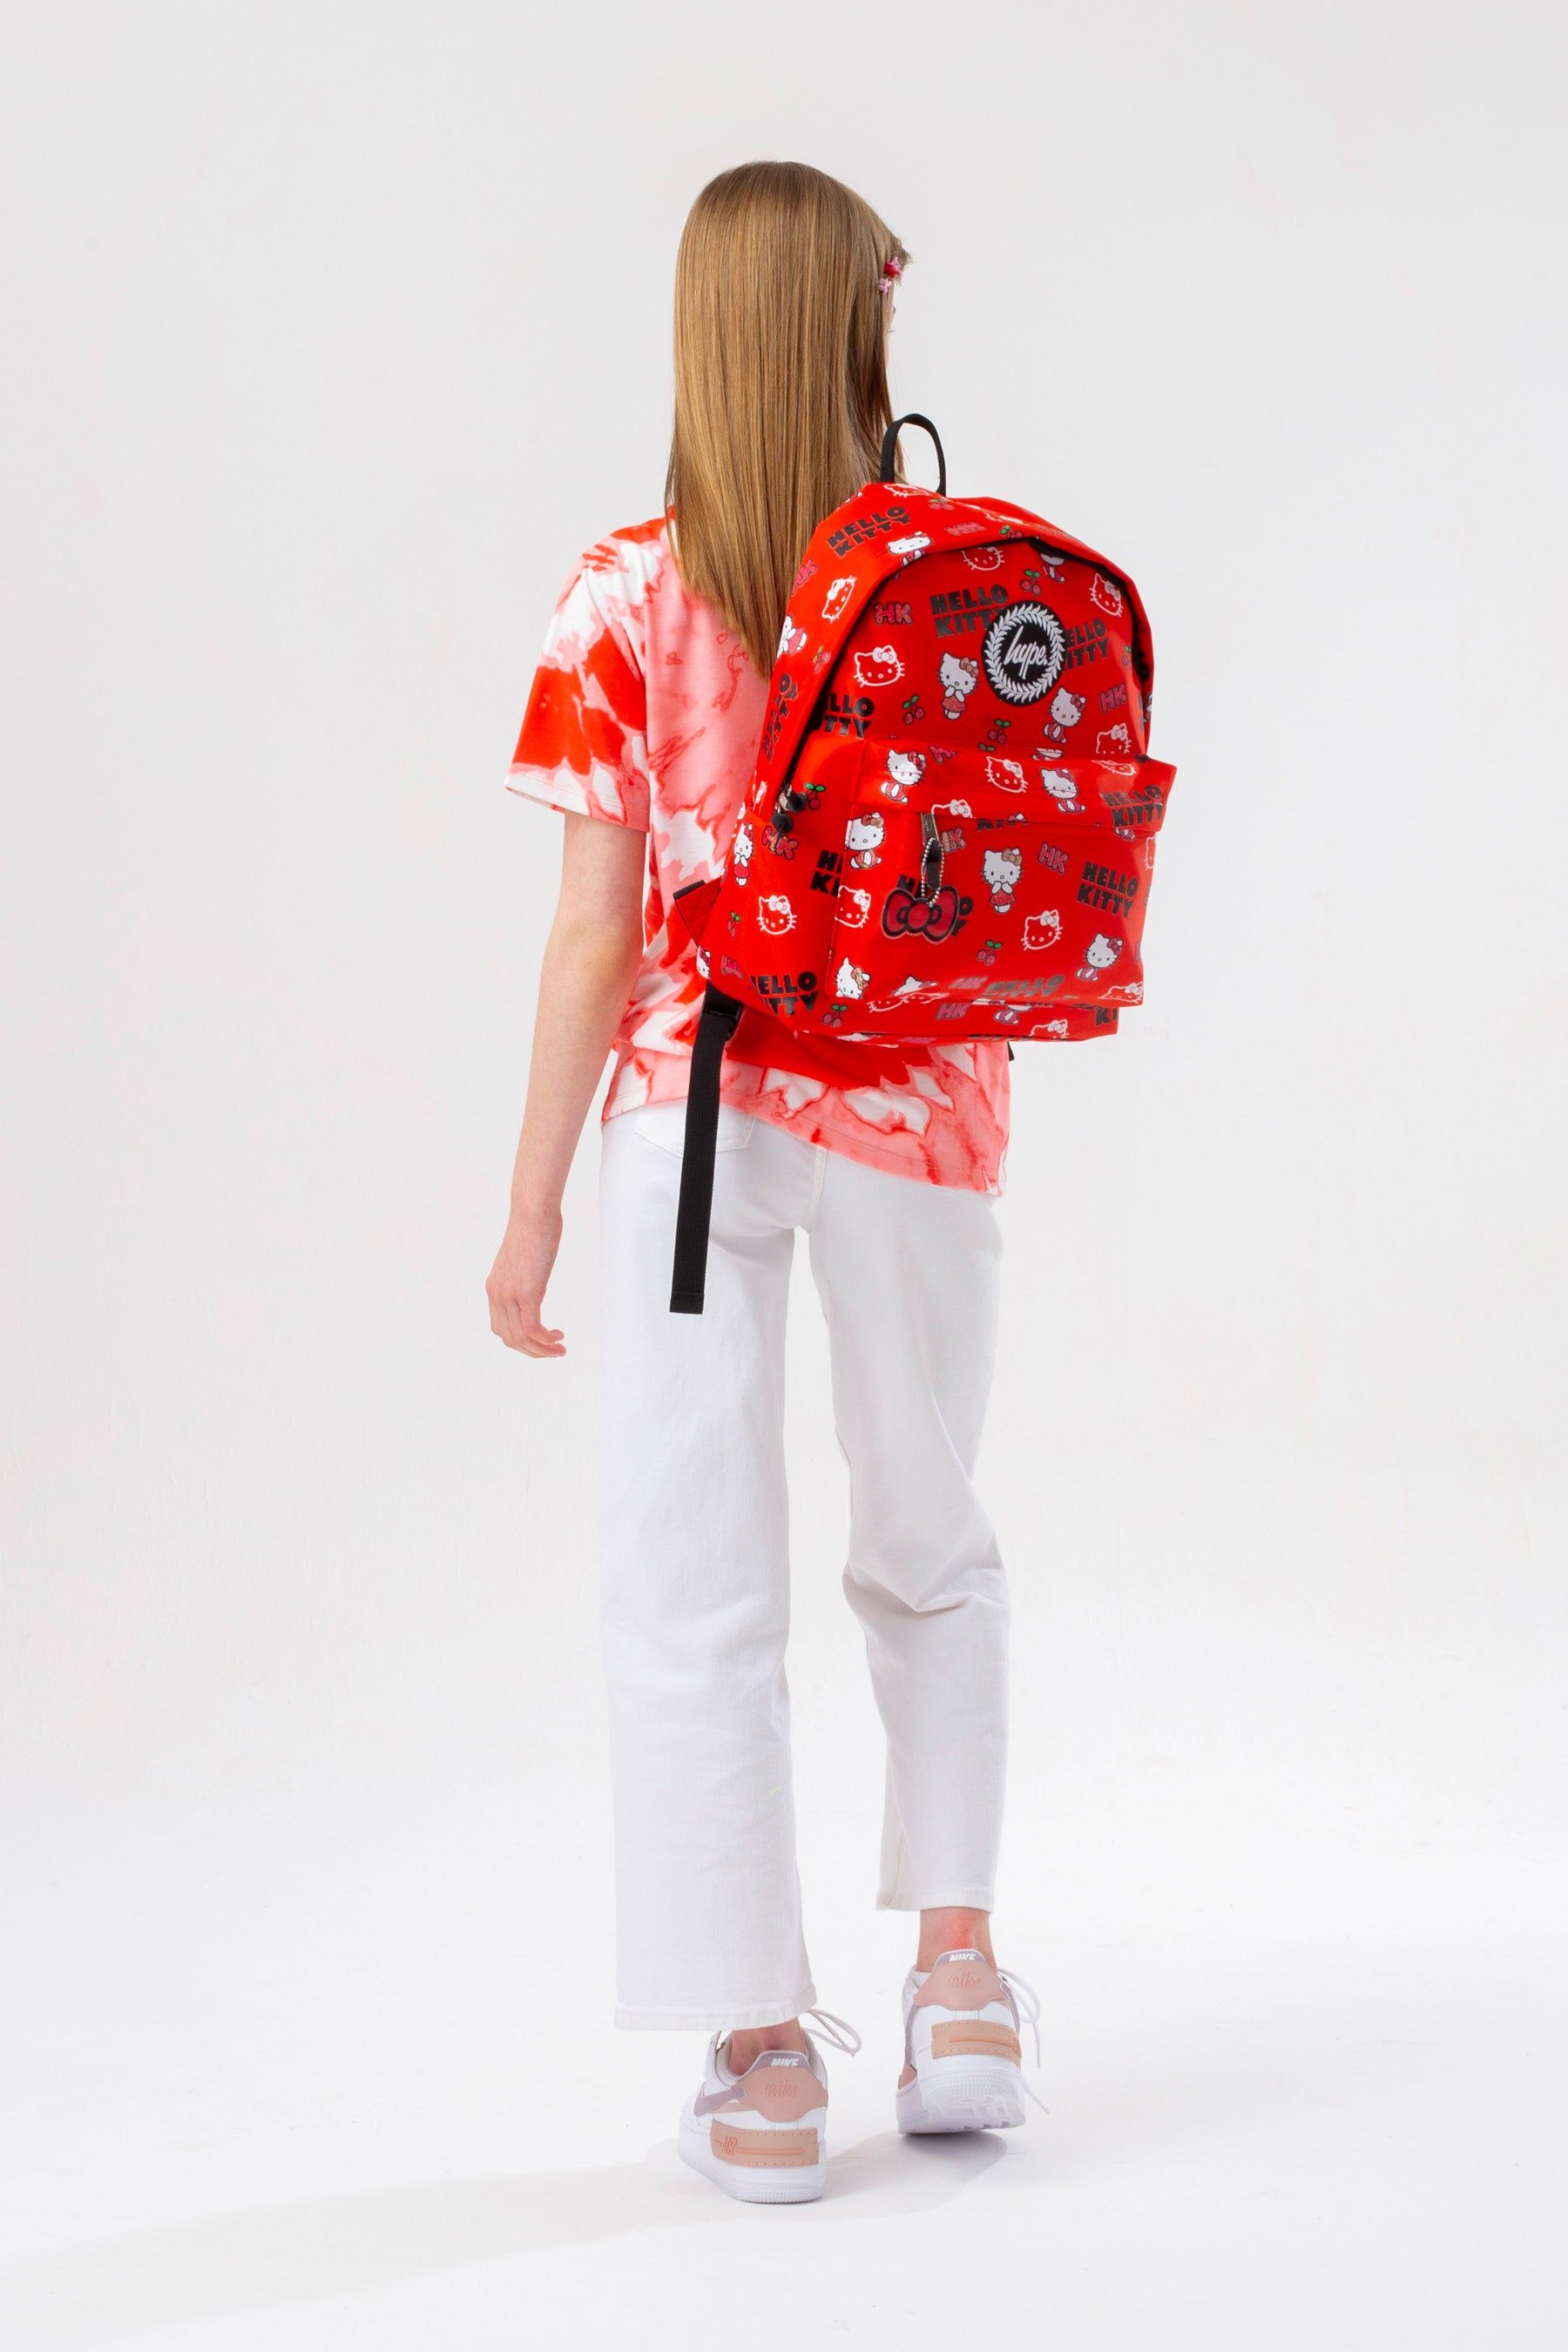 You can never have too many backpacks! Meet the HYPE. X Hello Kitty Mini Print Backpack, part of our brand new collaboration collection and your new go-to accessory. Designed in our standard backpack shape in a red nylon fabric, boasting screen print detail, navy glitter, bow charm detail, and the iconic HYPE. crest logo. 